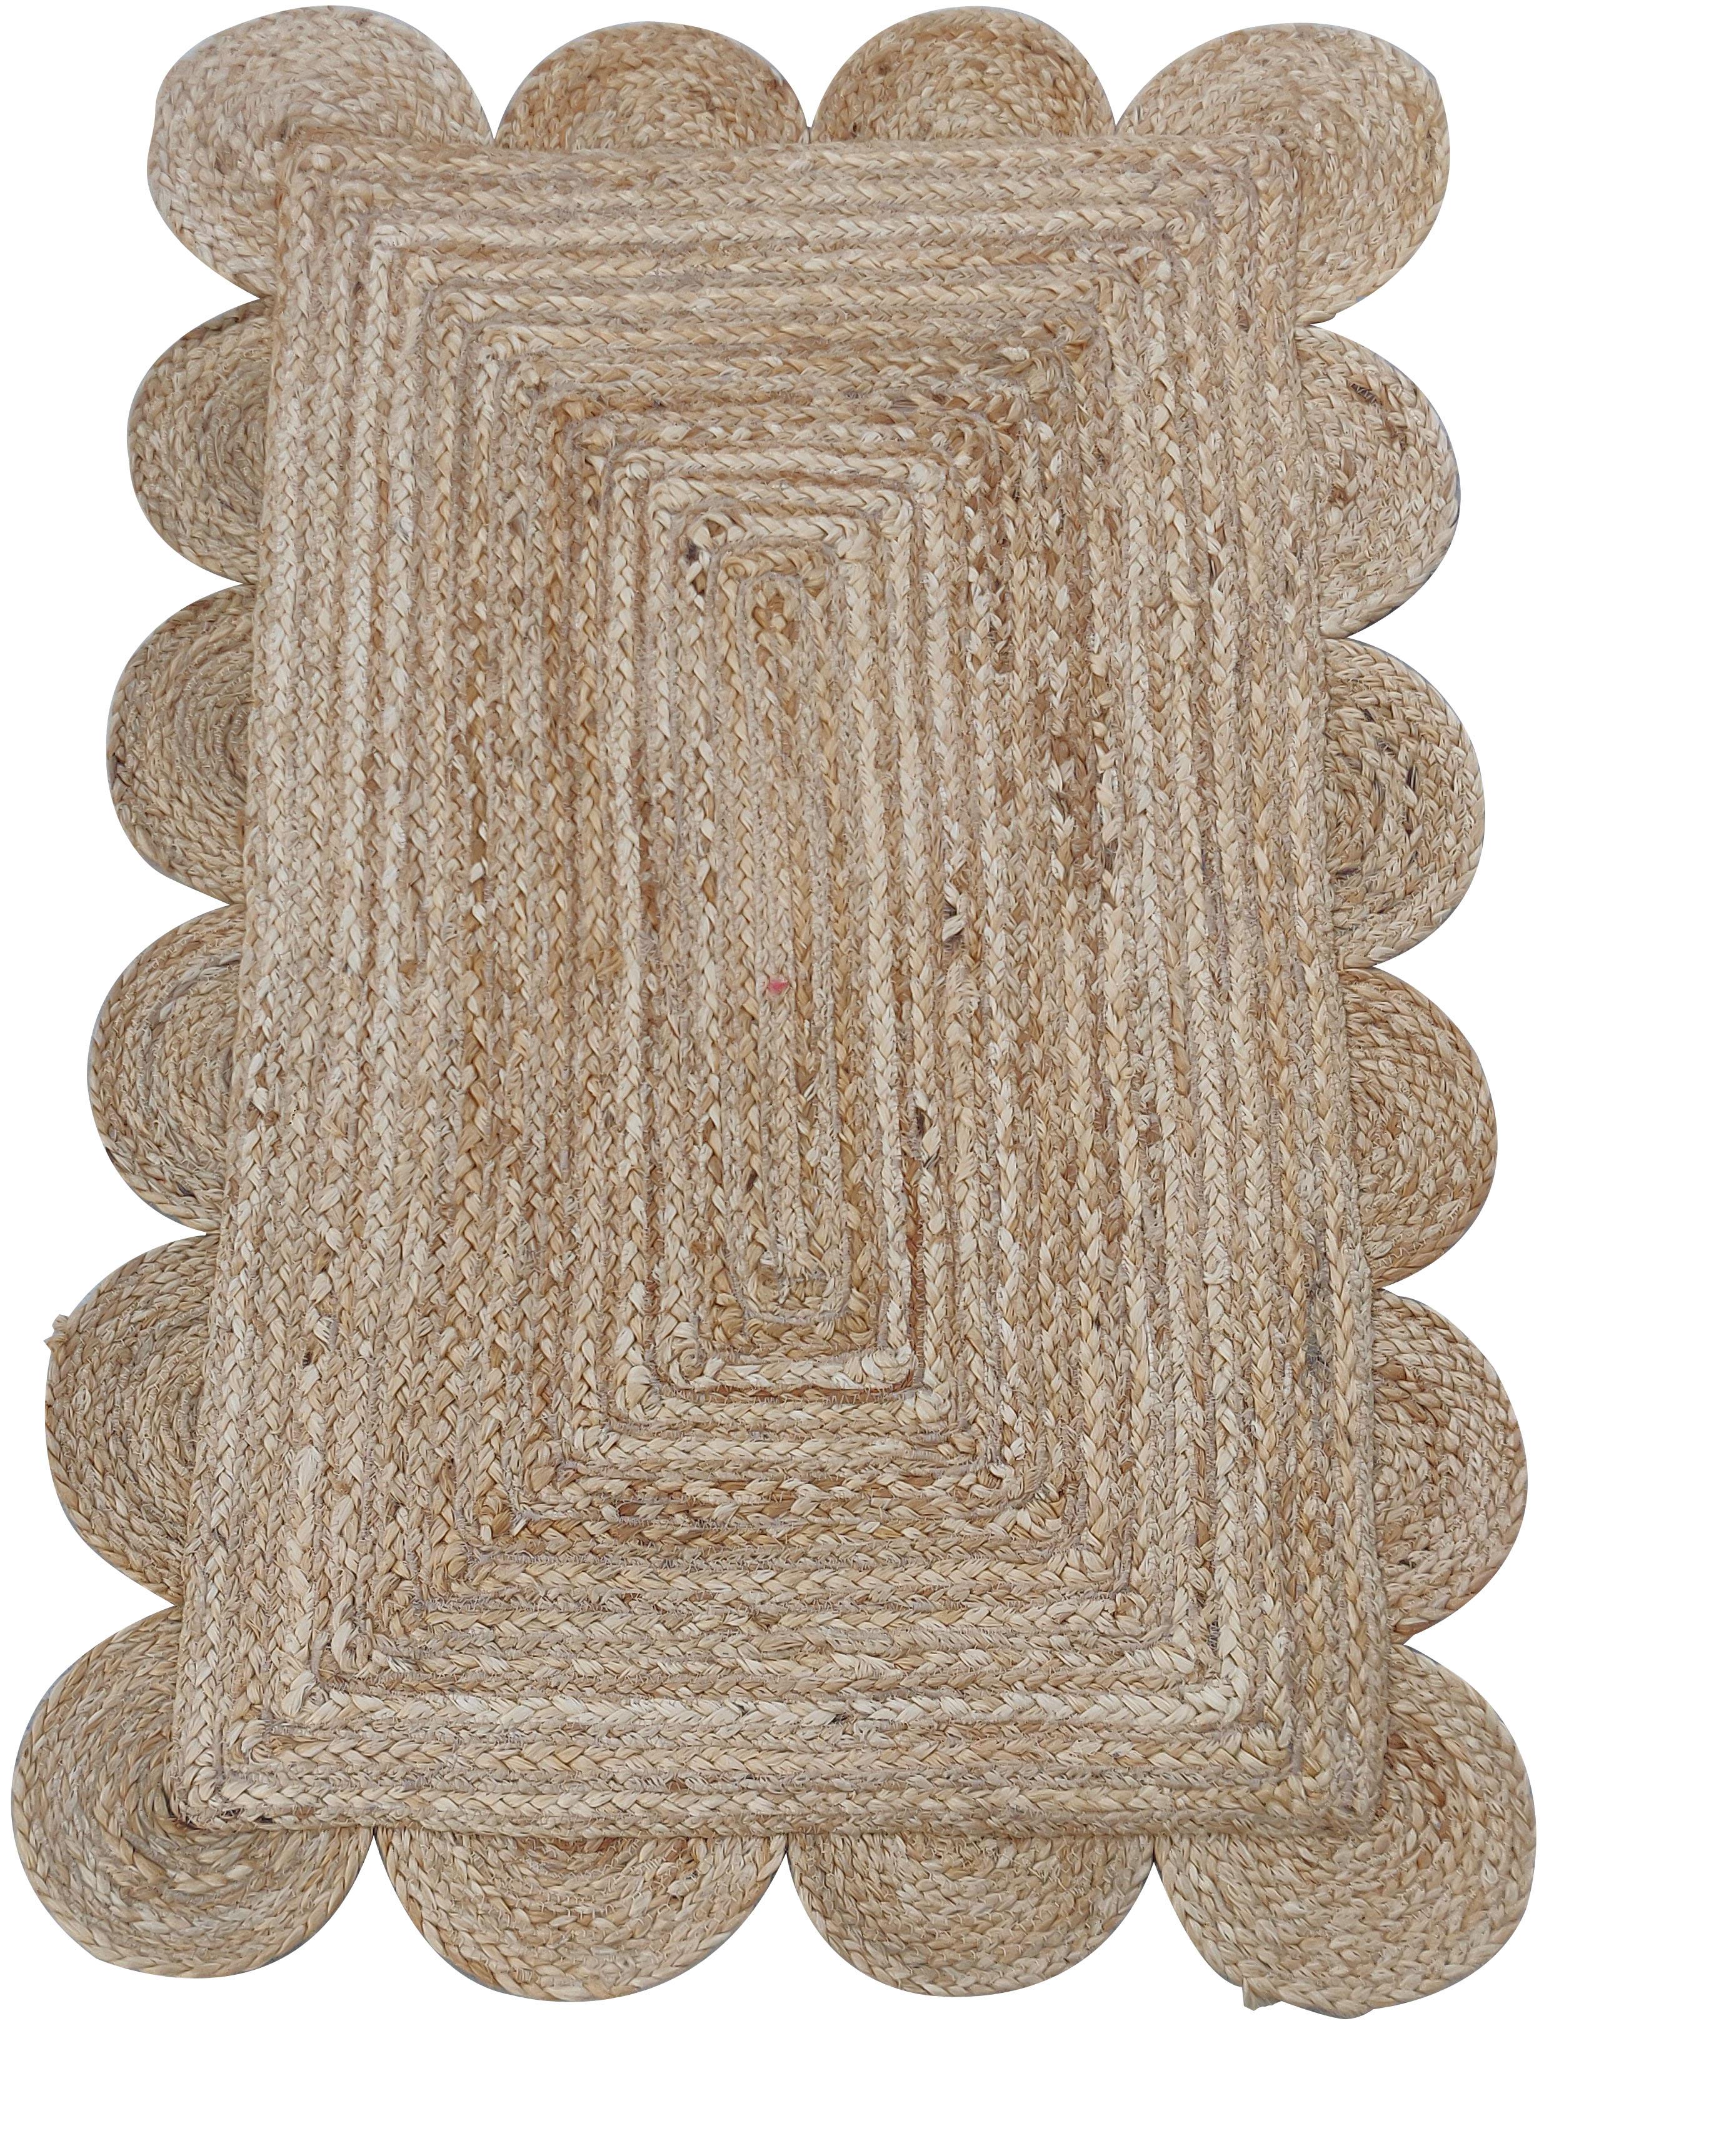 Handmade Jute Scalloped Rug, Natural Jute Dhurrie -2'x3'

These special flat-weave dhurries are hand-woven with 15 ply 100% cotton yarn. Due to the special manufacturing techniques used to create our rugs, the size and color of each piece may vary a